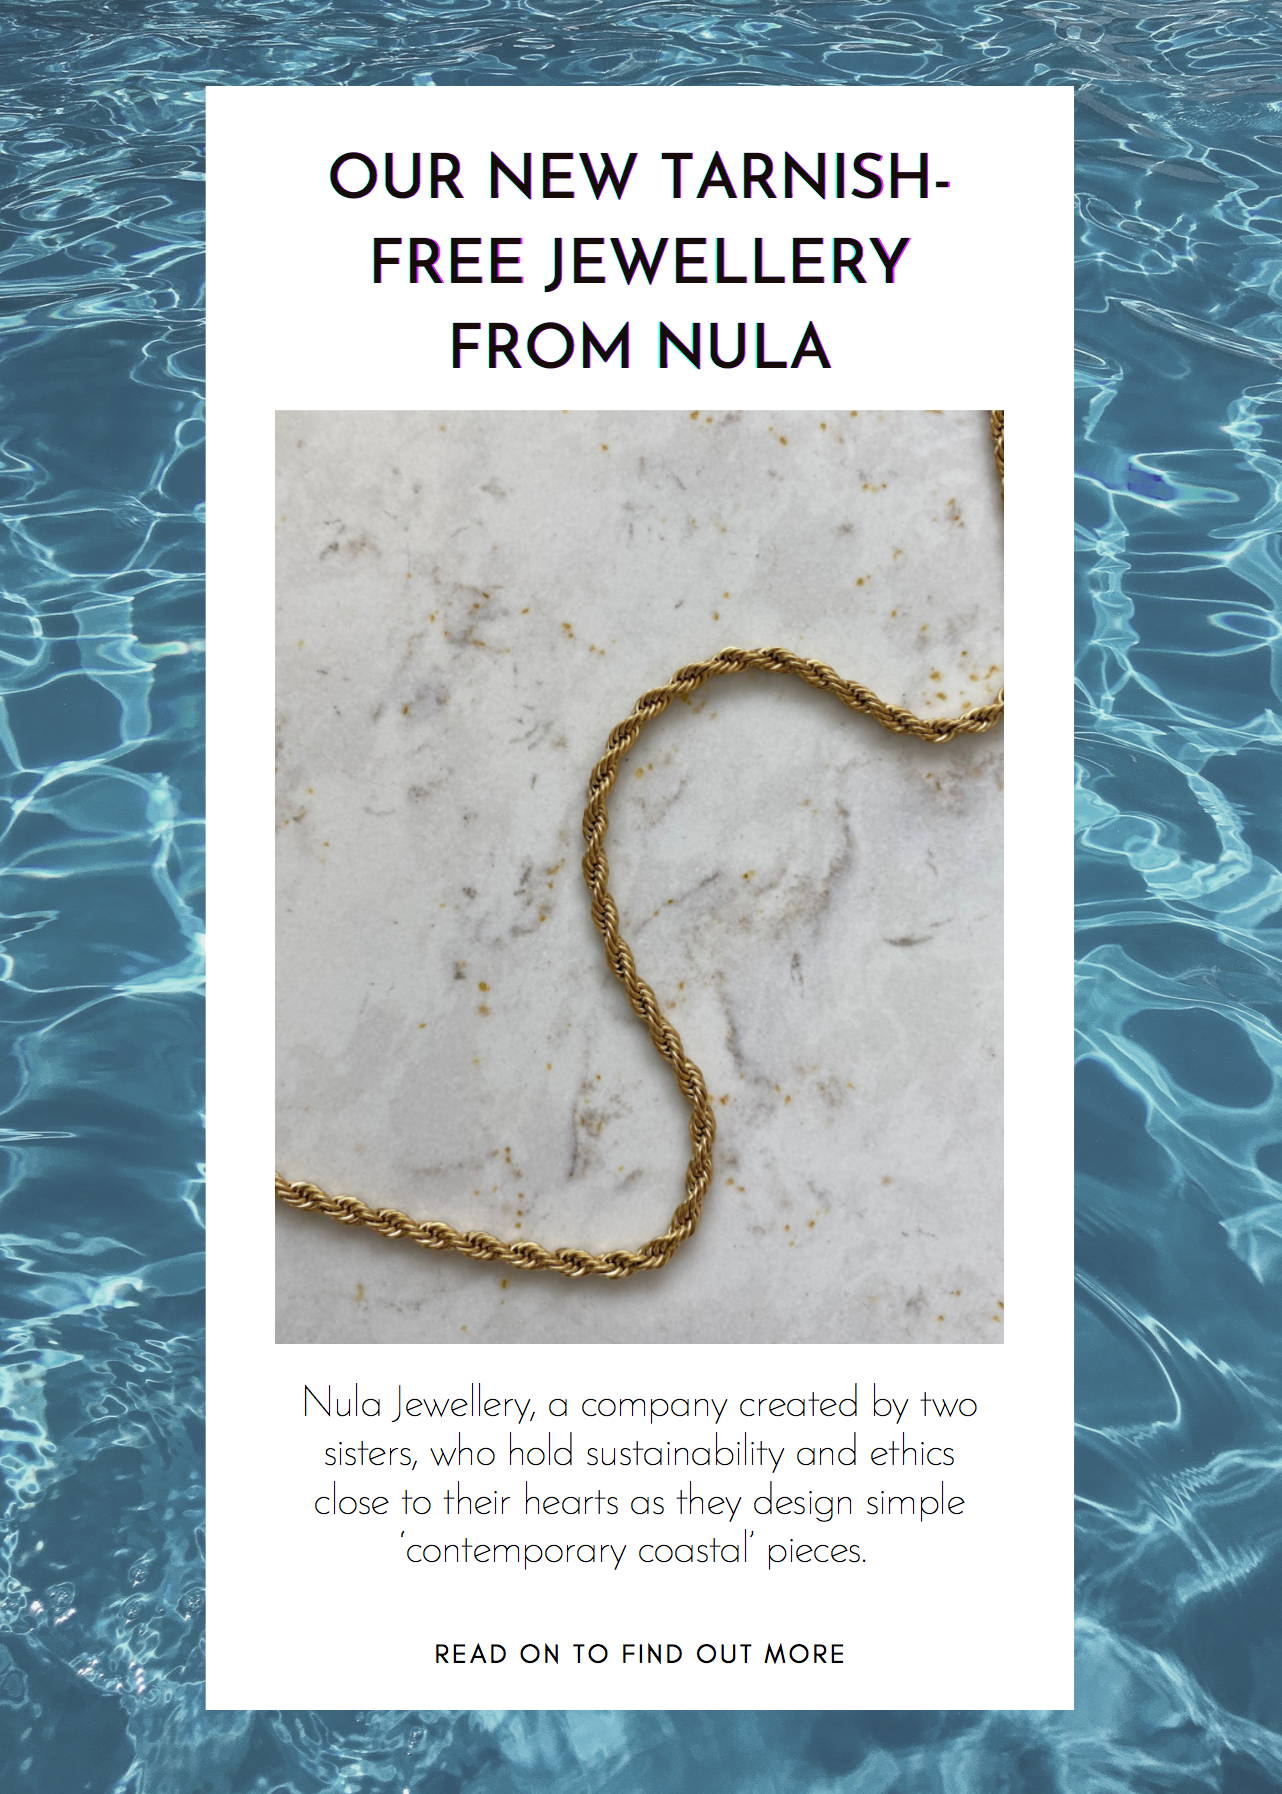 Our New Tarnish-free jewellery from Nula